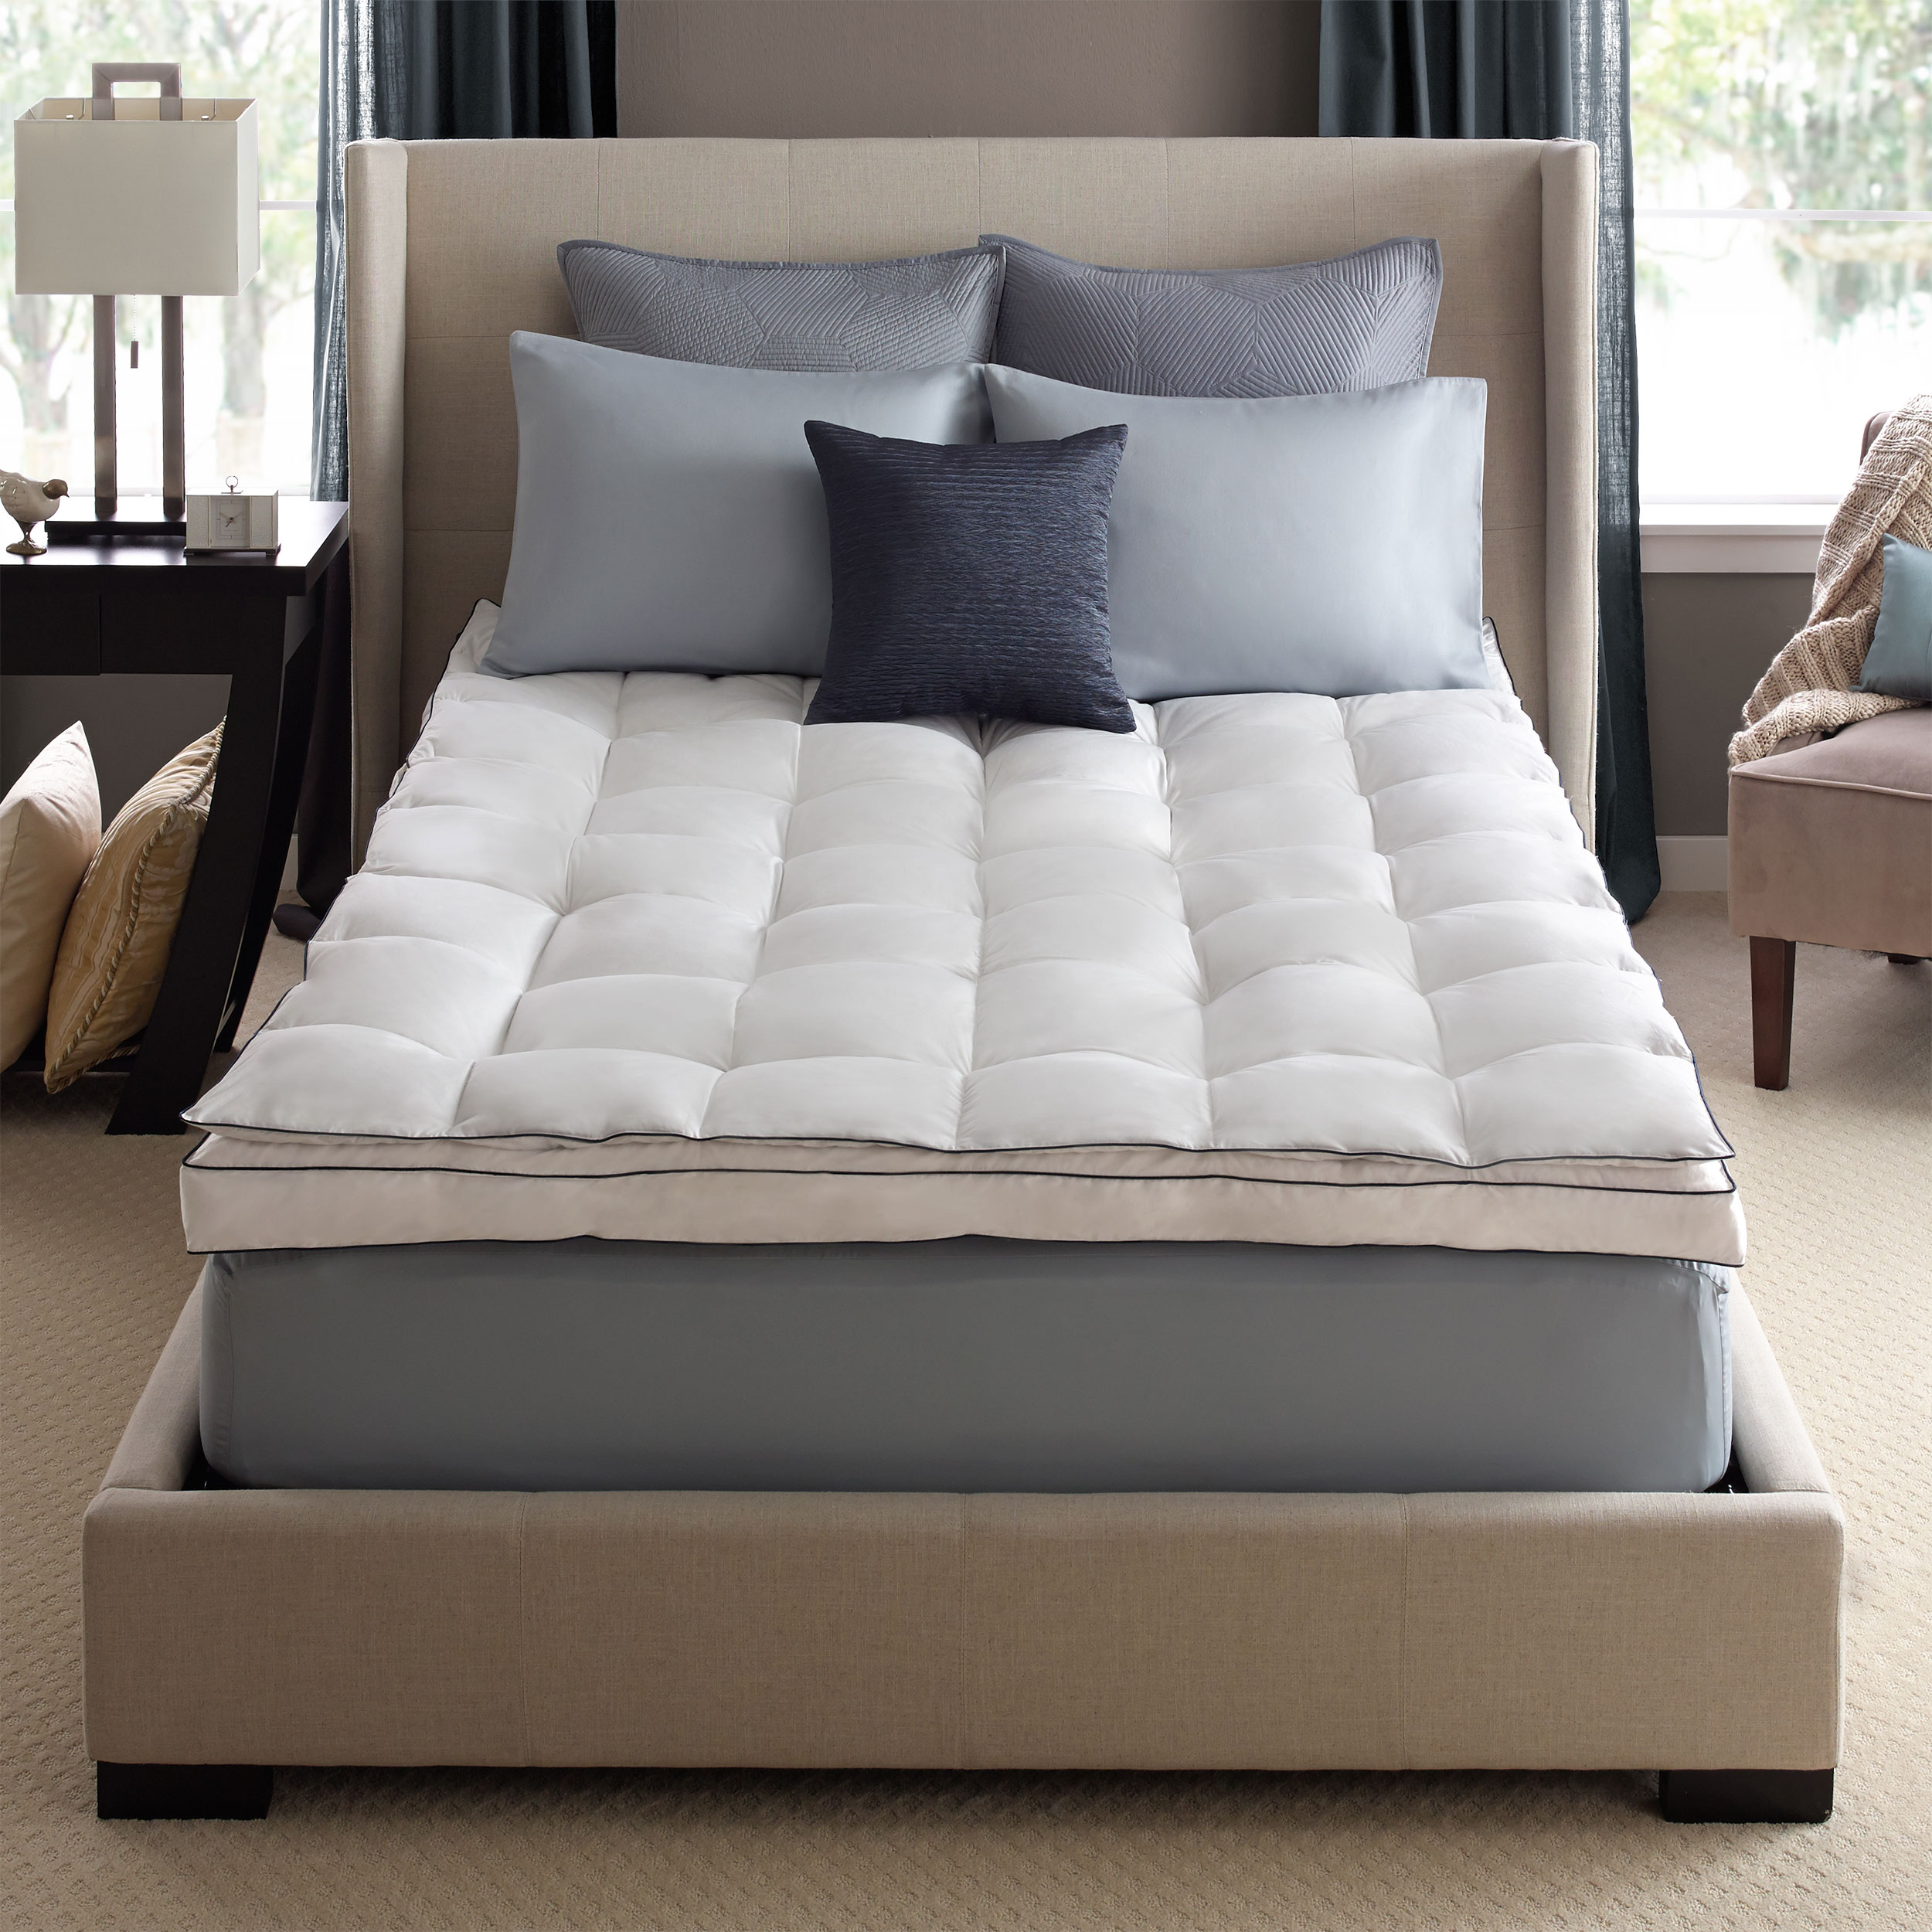 Pacific Coast® Online Bedding Stores Feather Beds